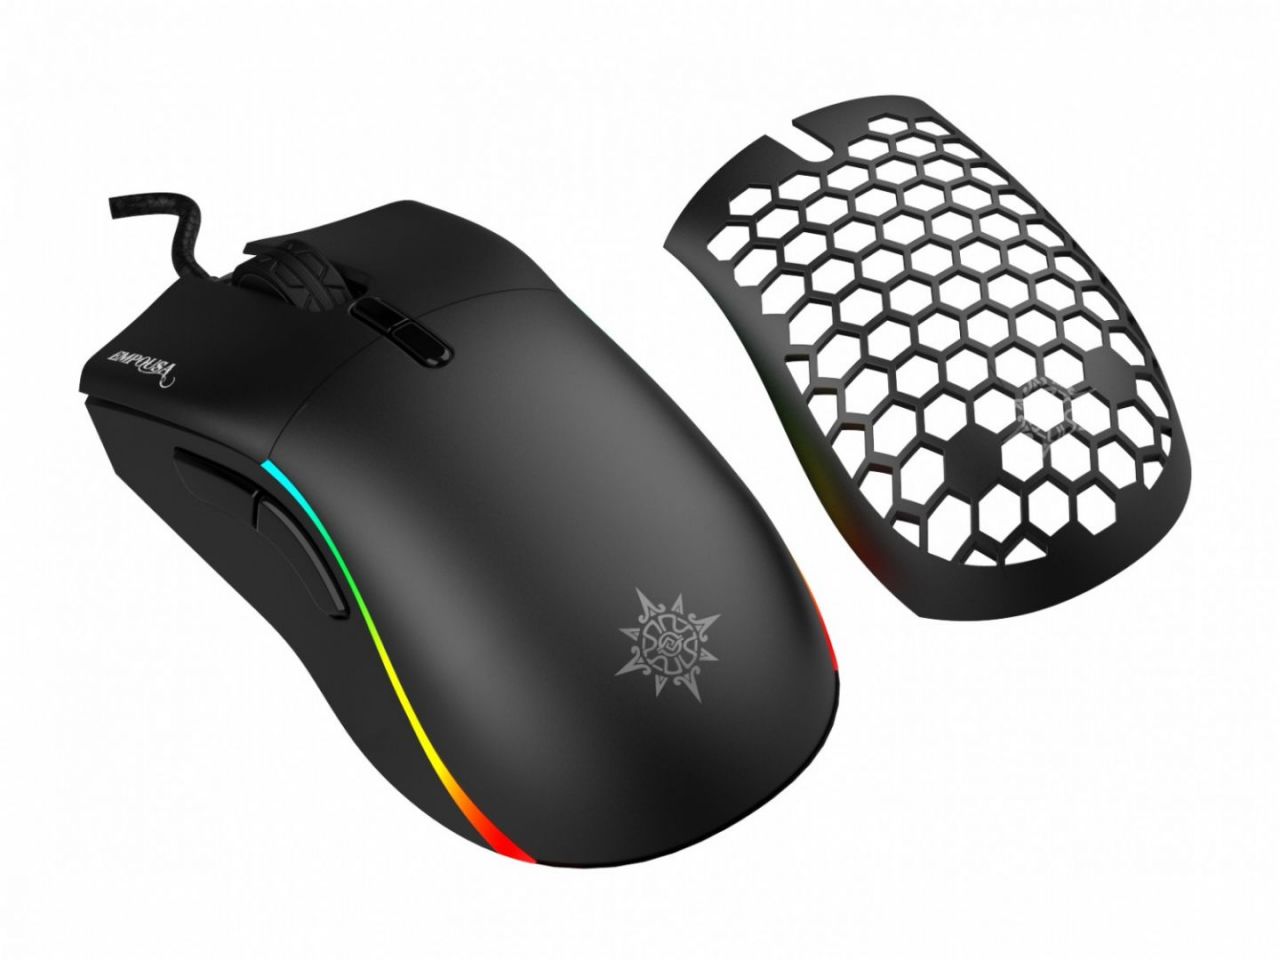 INCA IMG-GT20 Gaming Mouse Black